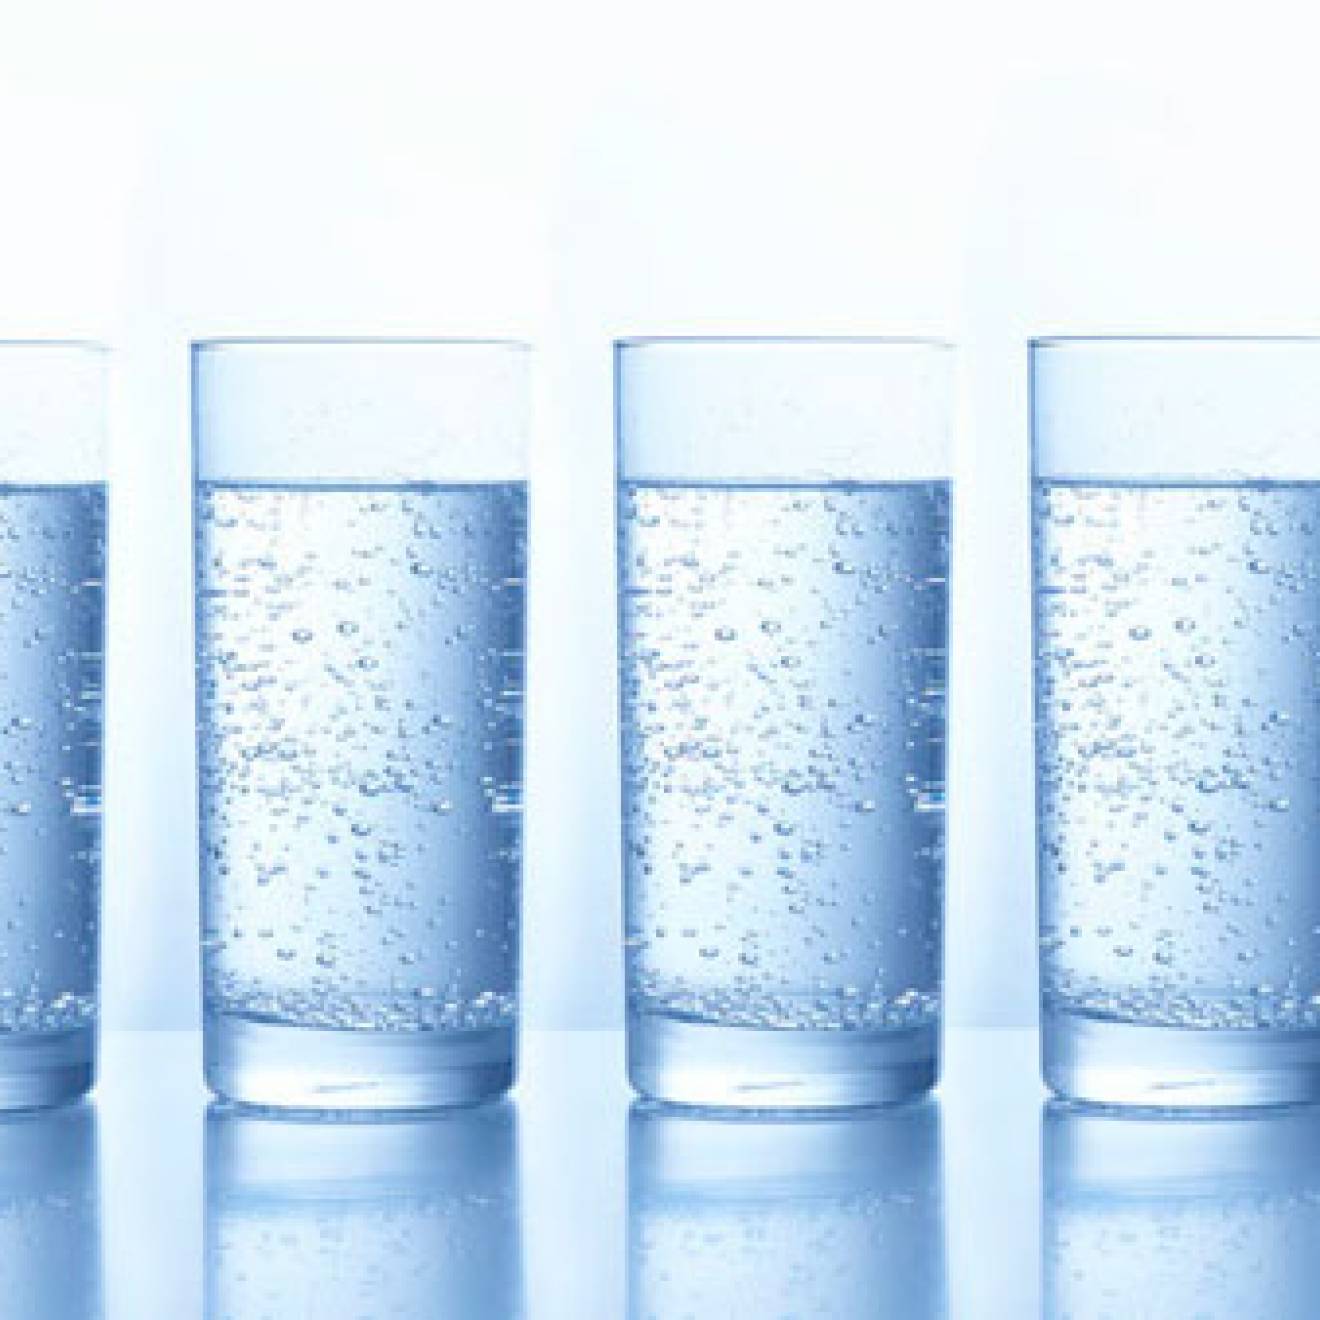 Glasses of water next to each other